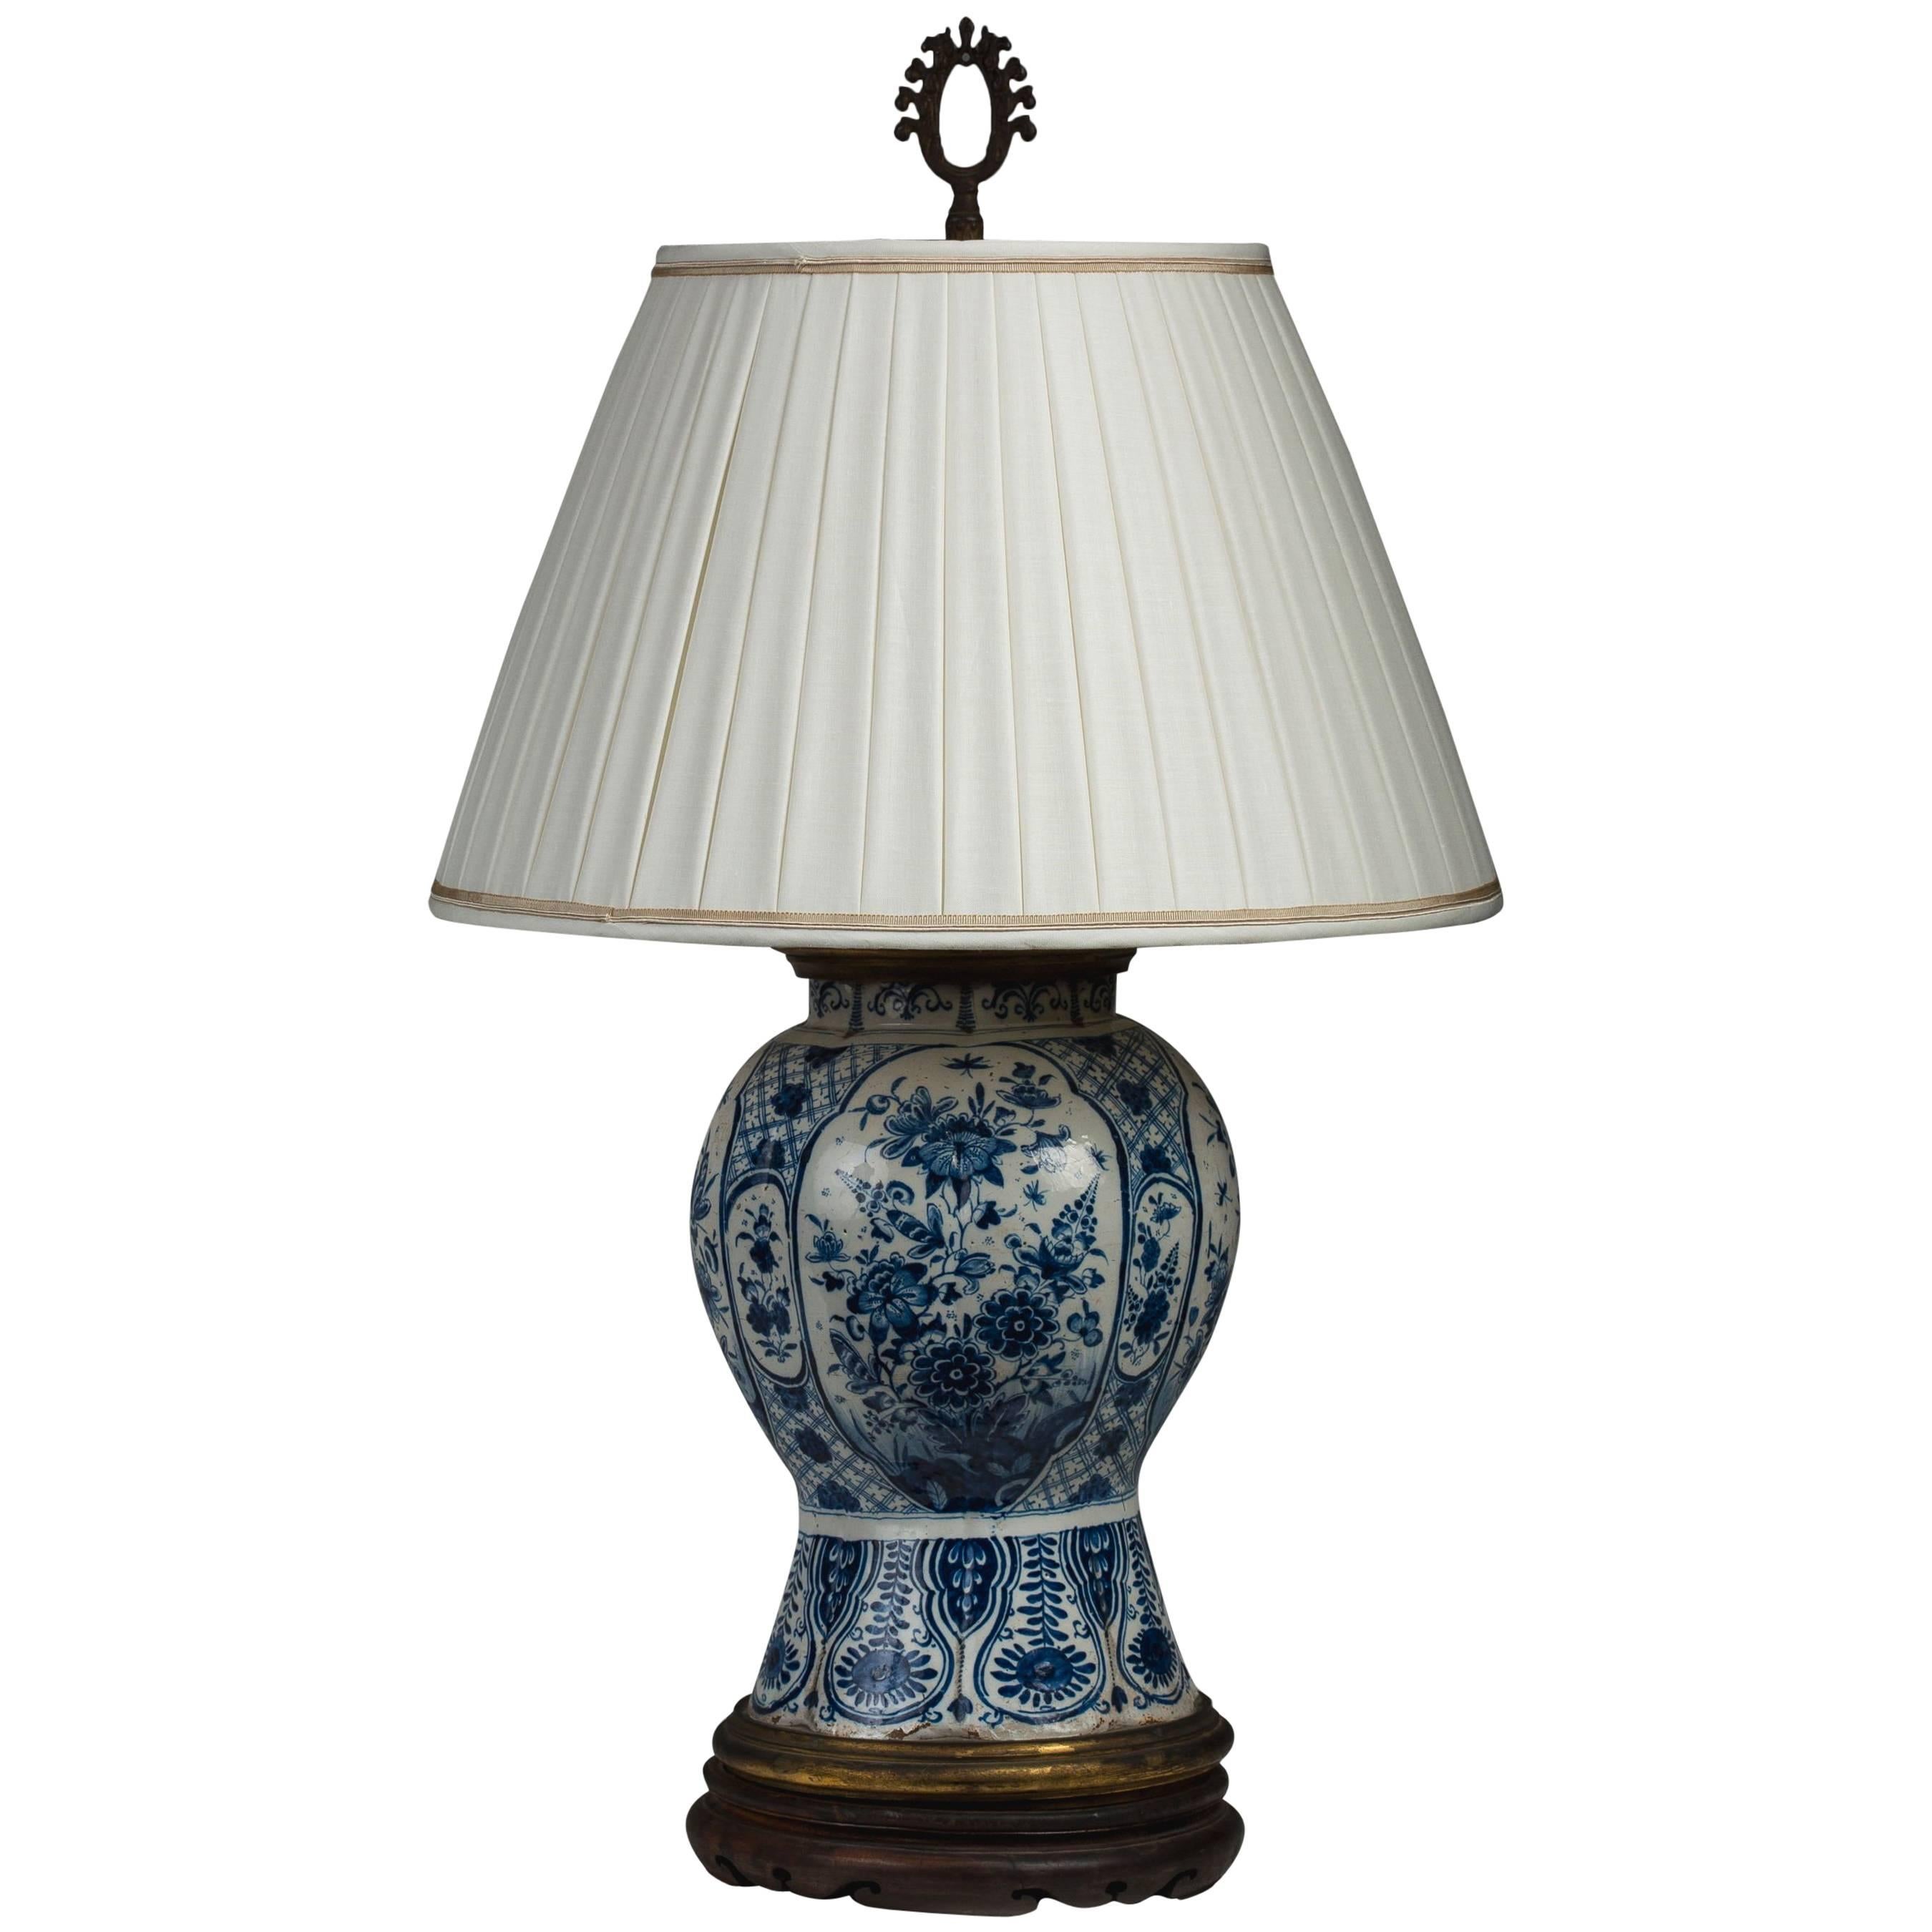 Delft Vase Mounted as a Lamp